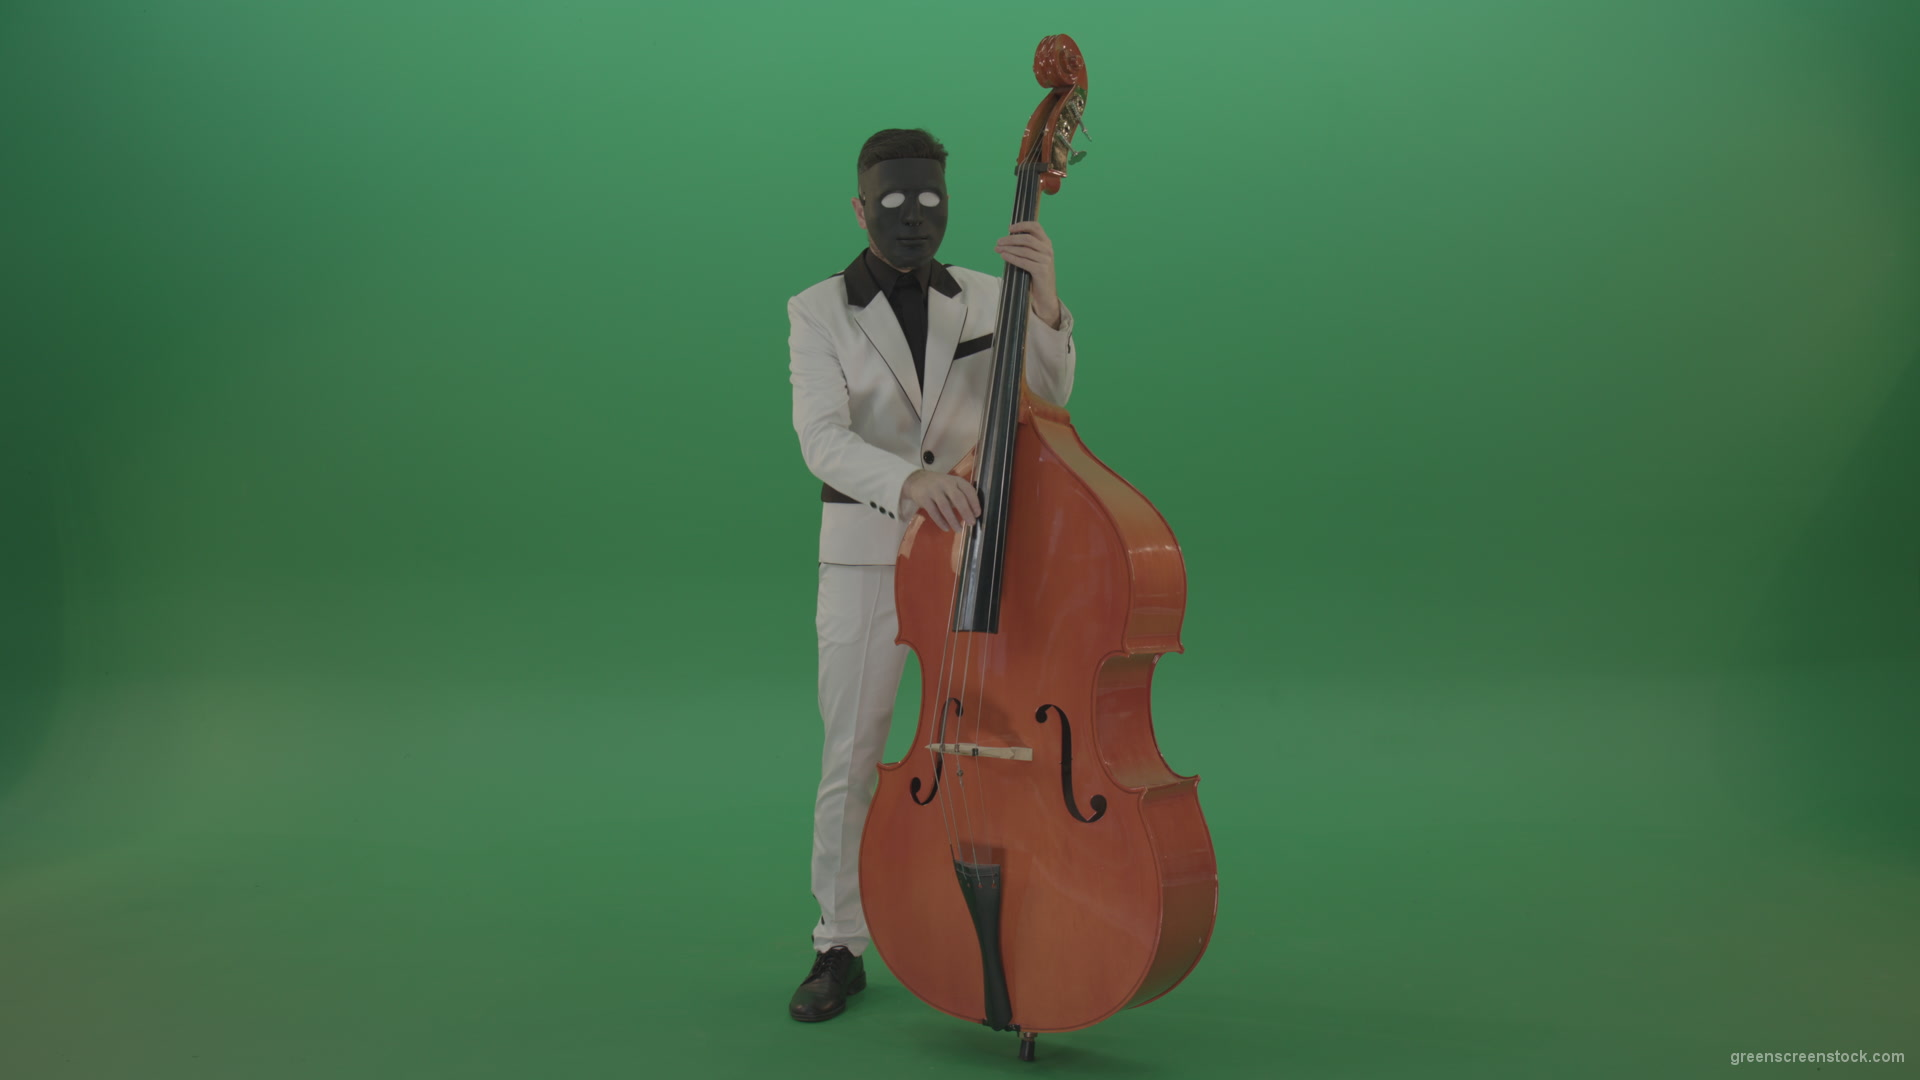 Man-in-white-costume-and-blac-mask-play-jazz-music-on-double-bass-orchestra-music-instument-isolated-on-green-screen_009 Green Screen Stock